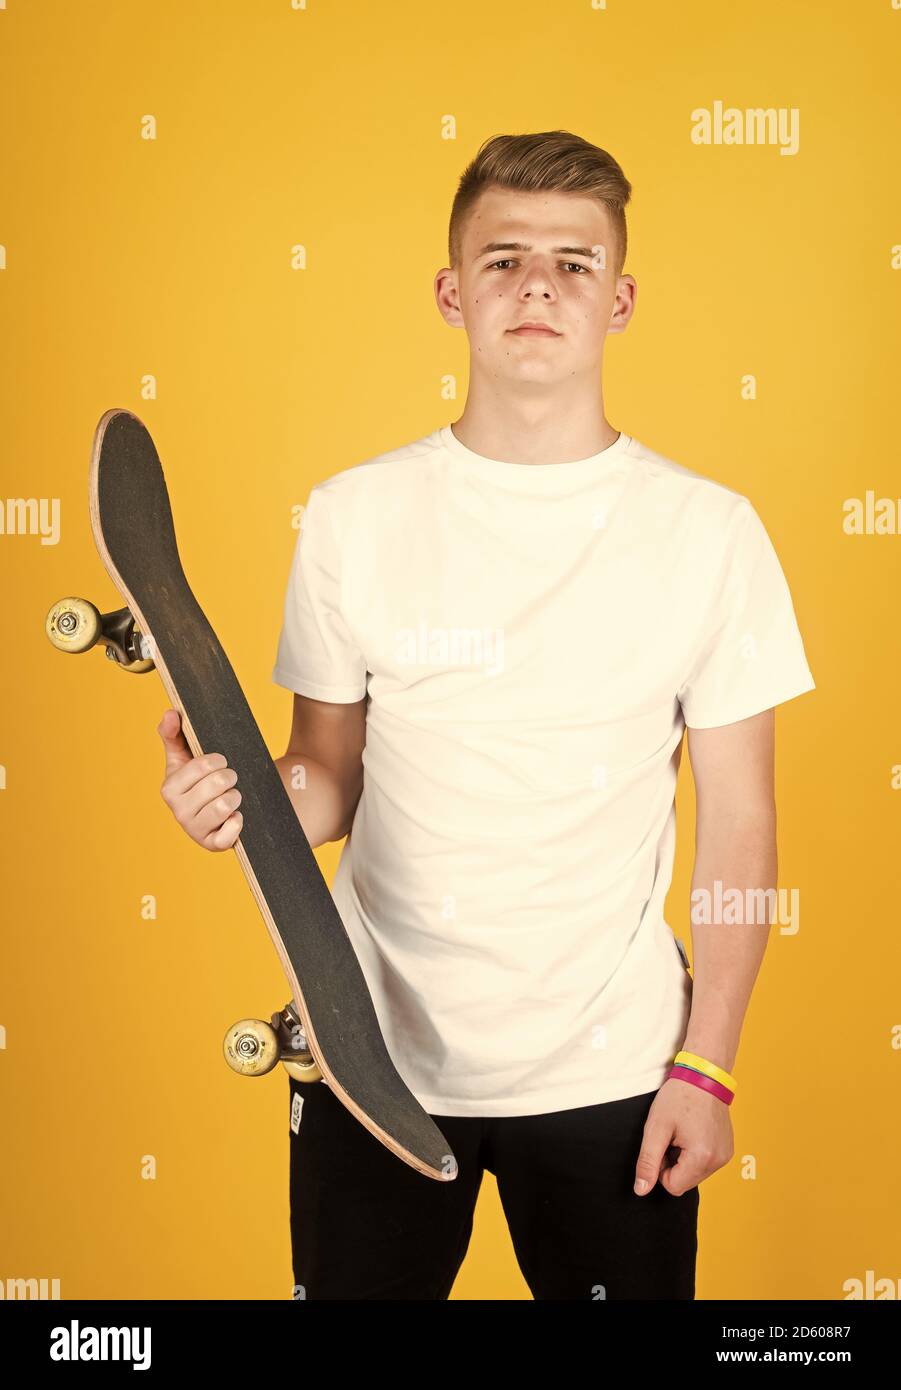 teen boy with skateboard. hipster teen boy hold penny board. urban boy with penny  skateboard. young kid has riding hobby. city style. child learns to ride penny  board. trendy teen skater practicing